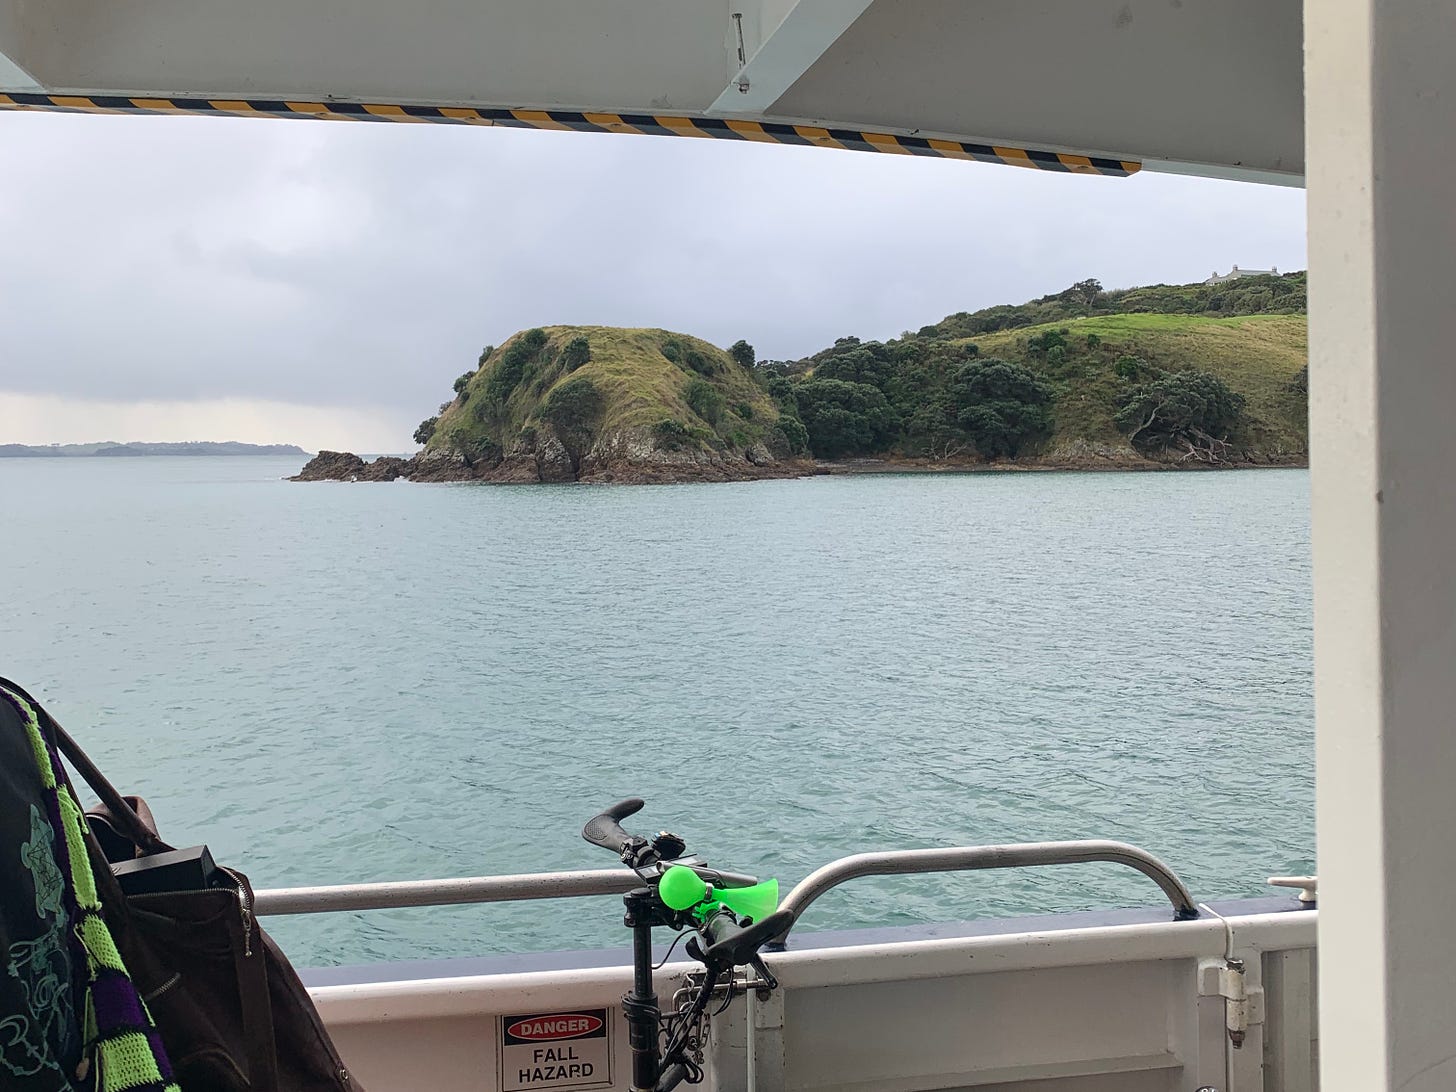 Matiatia headland on Waiheke Island, as framed through the upper and lower decks of the passenger ferry as it enters the harbour. In the foreground are the handlebars of a bike with a little green horn. A small sign on the ferry reads "fall hazard" and on the upper frame of the view is a strip of yellow and black danger tape. It is an overcast day but the headland glows a moss green. The sea is a dull teal and the sky is a grey cloud with a small amber band of clearer sky on the horizon above Rakino, another island in the Hauraki Gulf